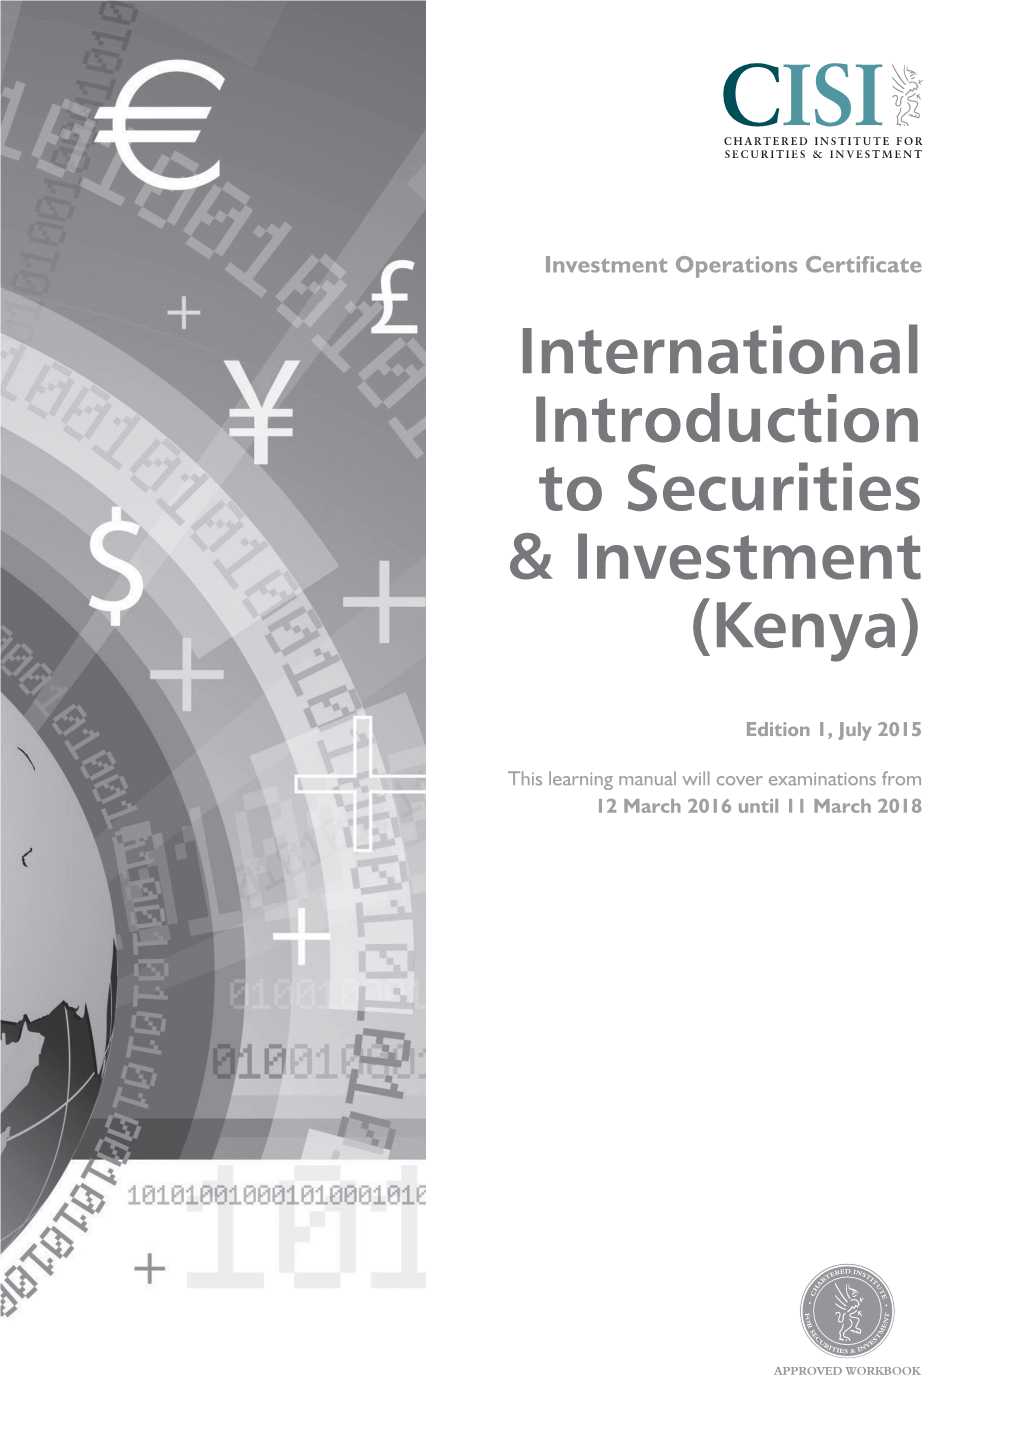 International Introduction to Securities & Investment (Kenya)